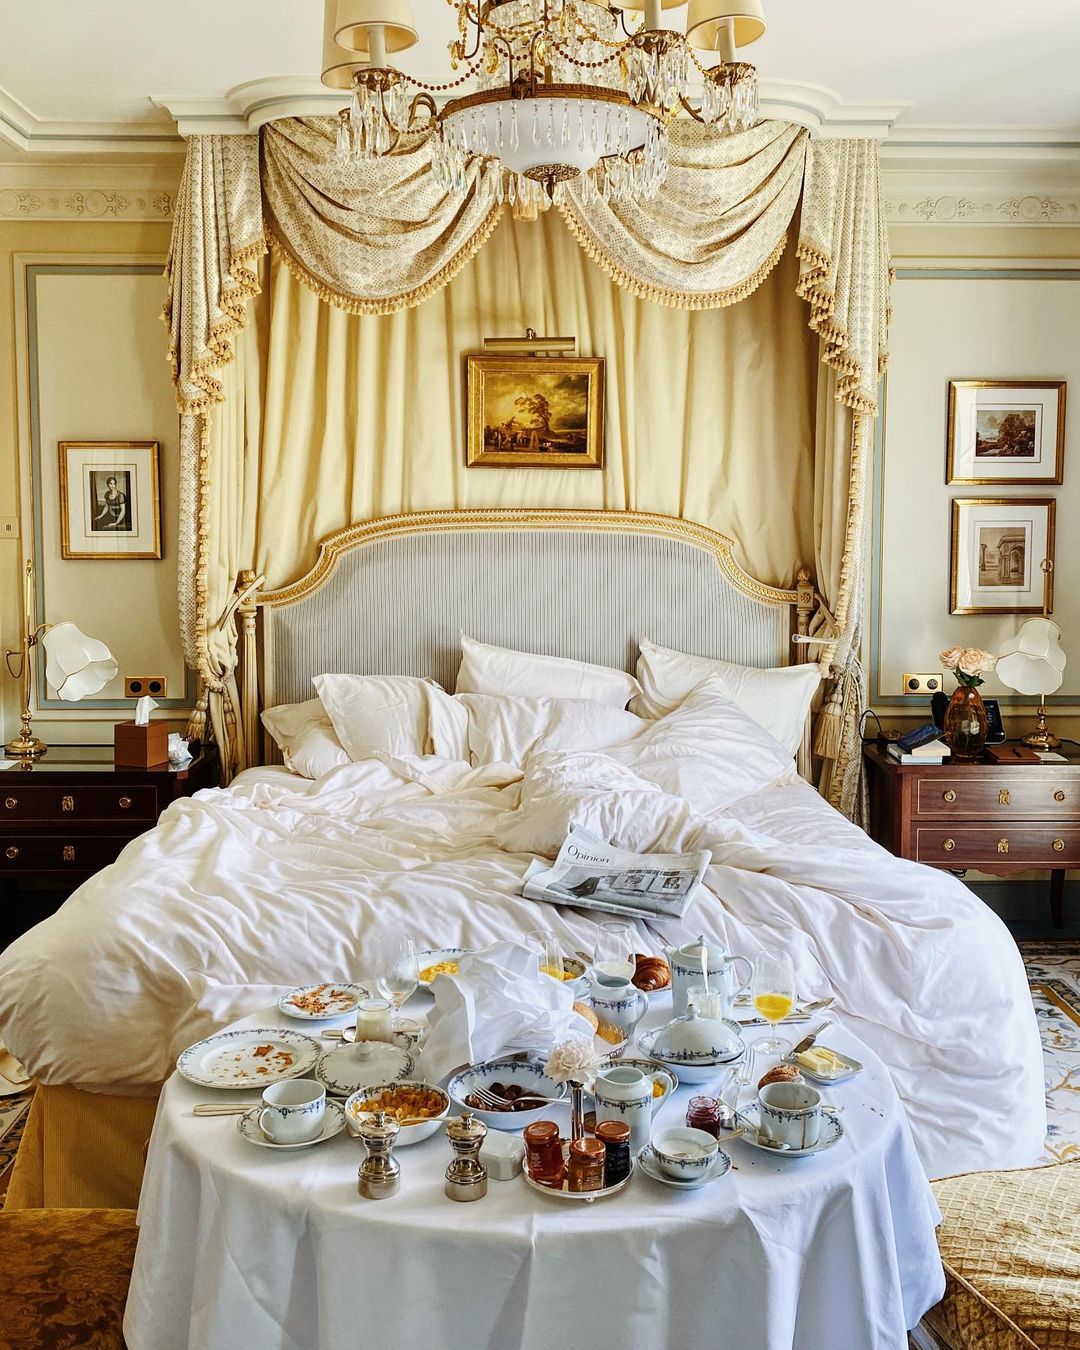 An indulgent breakfast-in-bed scene at Ritz Paris with a gold canopy, ticking stripe headboard, antique wooden furniture and framed gallery art